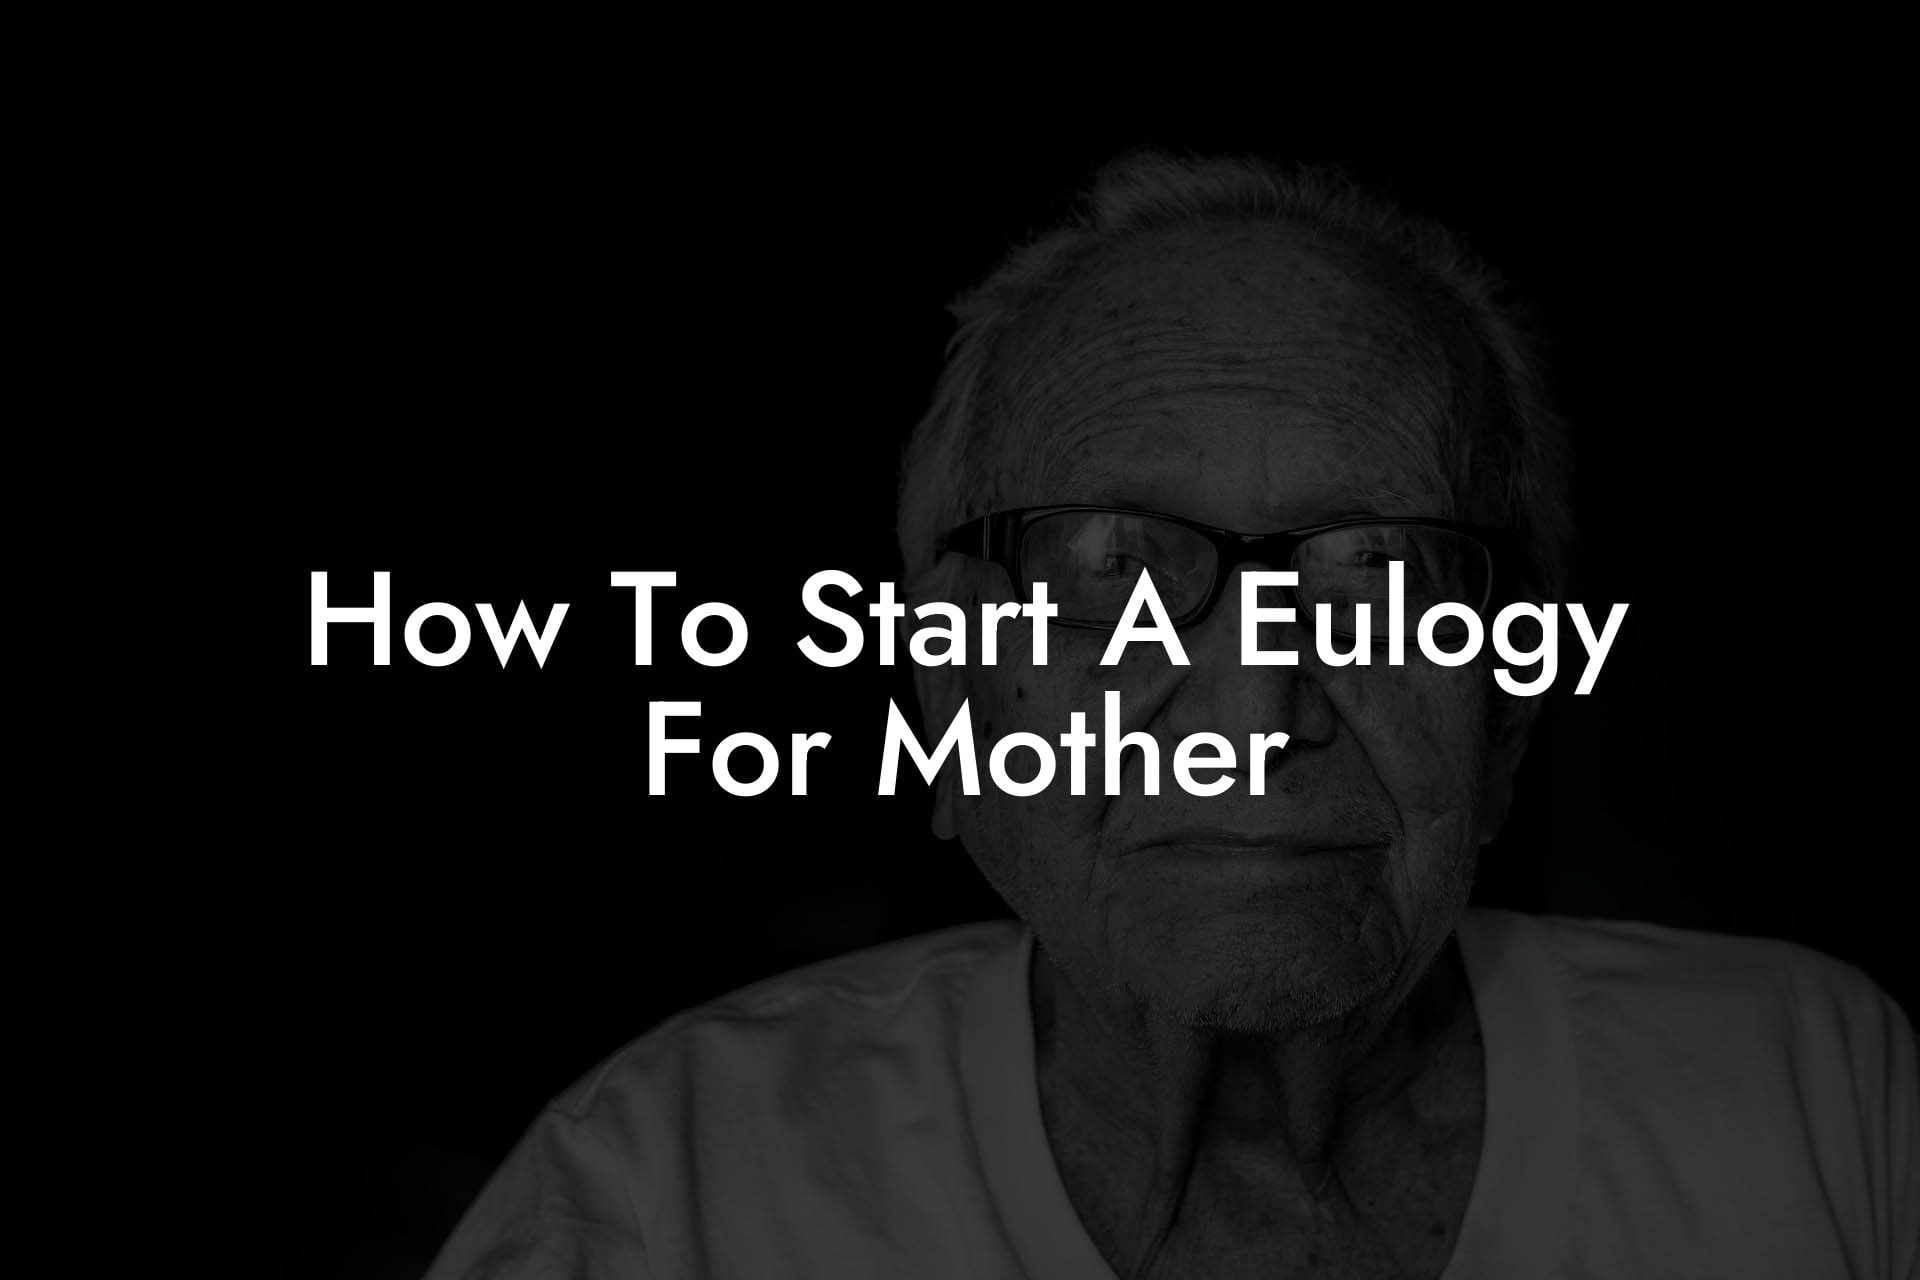 How To Start A Eulogy For Mother